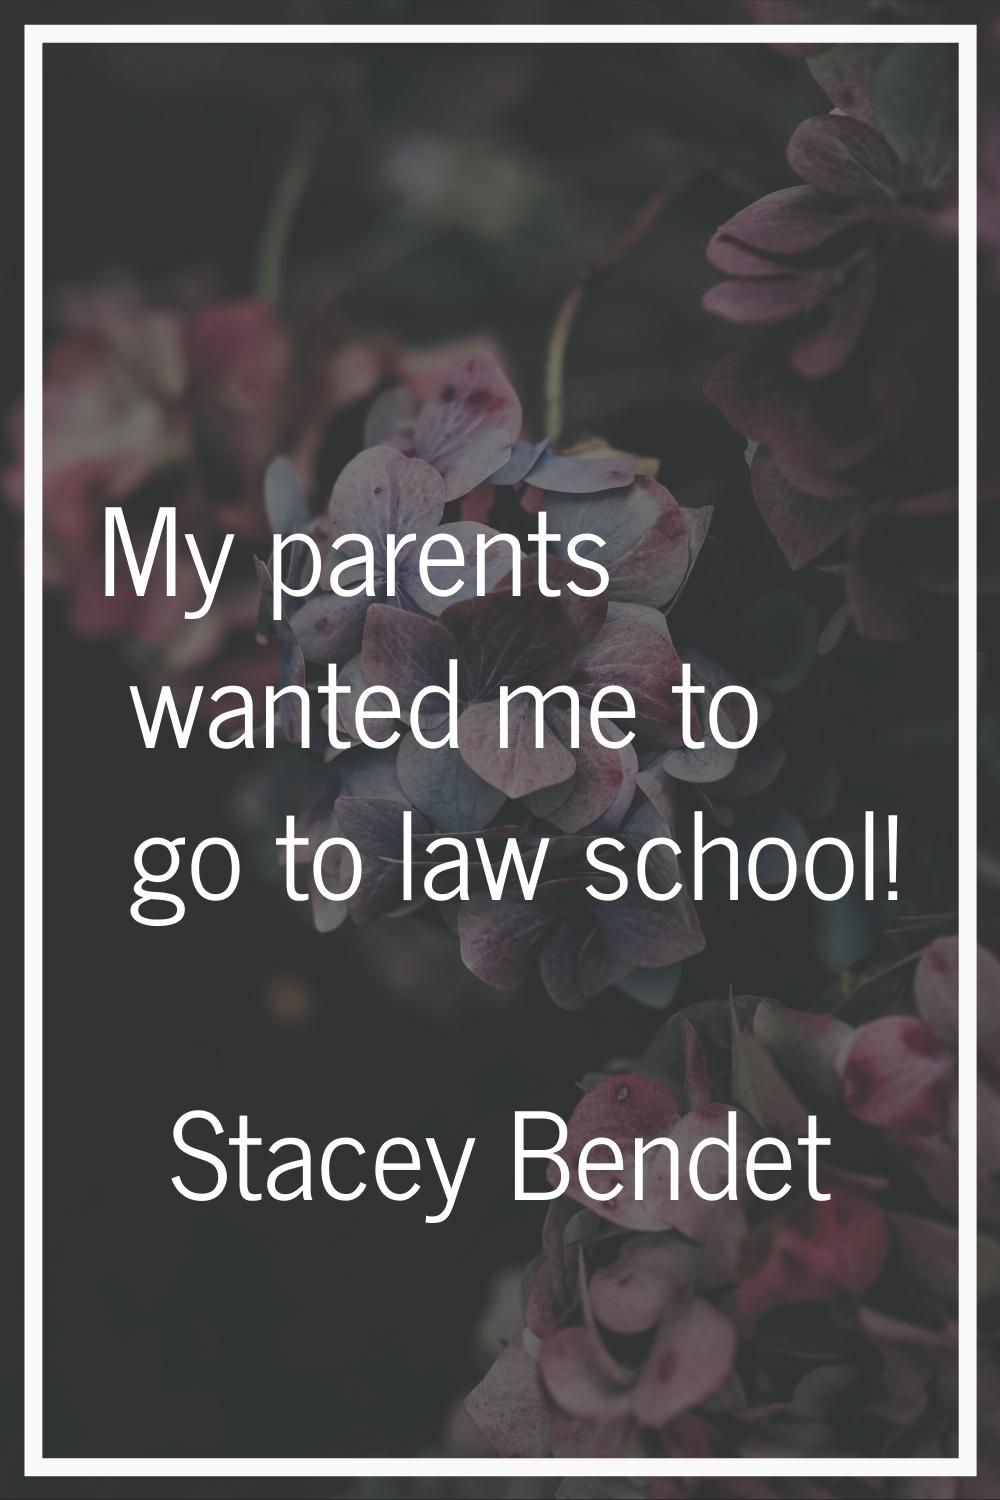 My parents wanted me to go to law school!